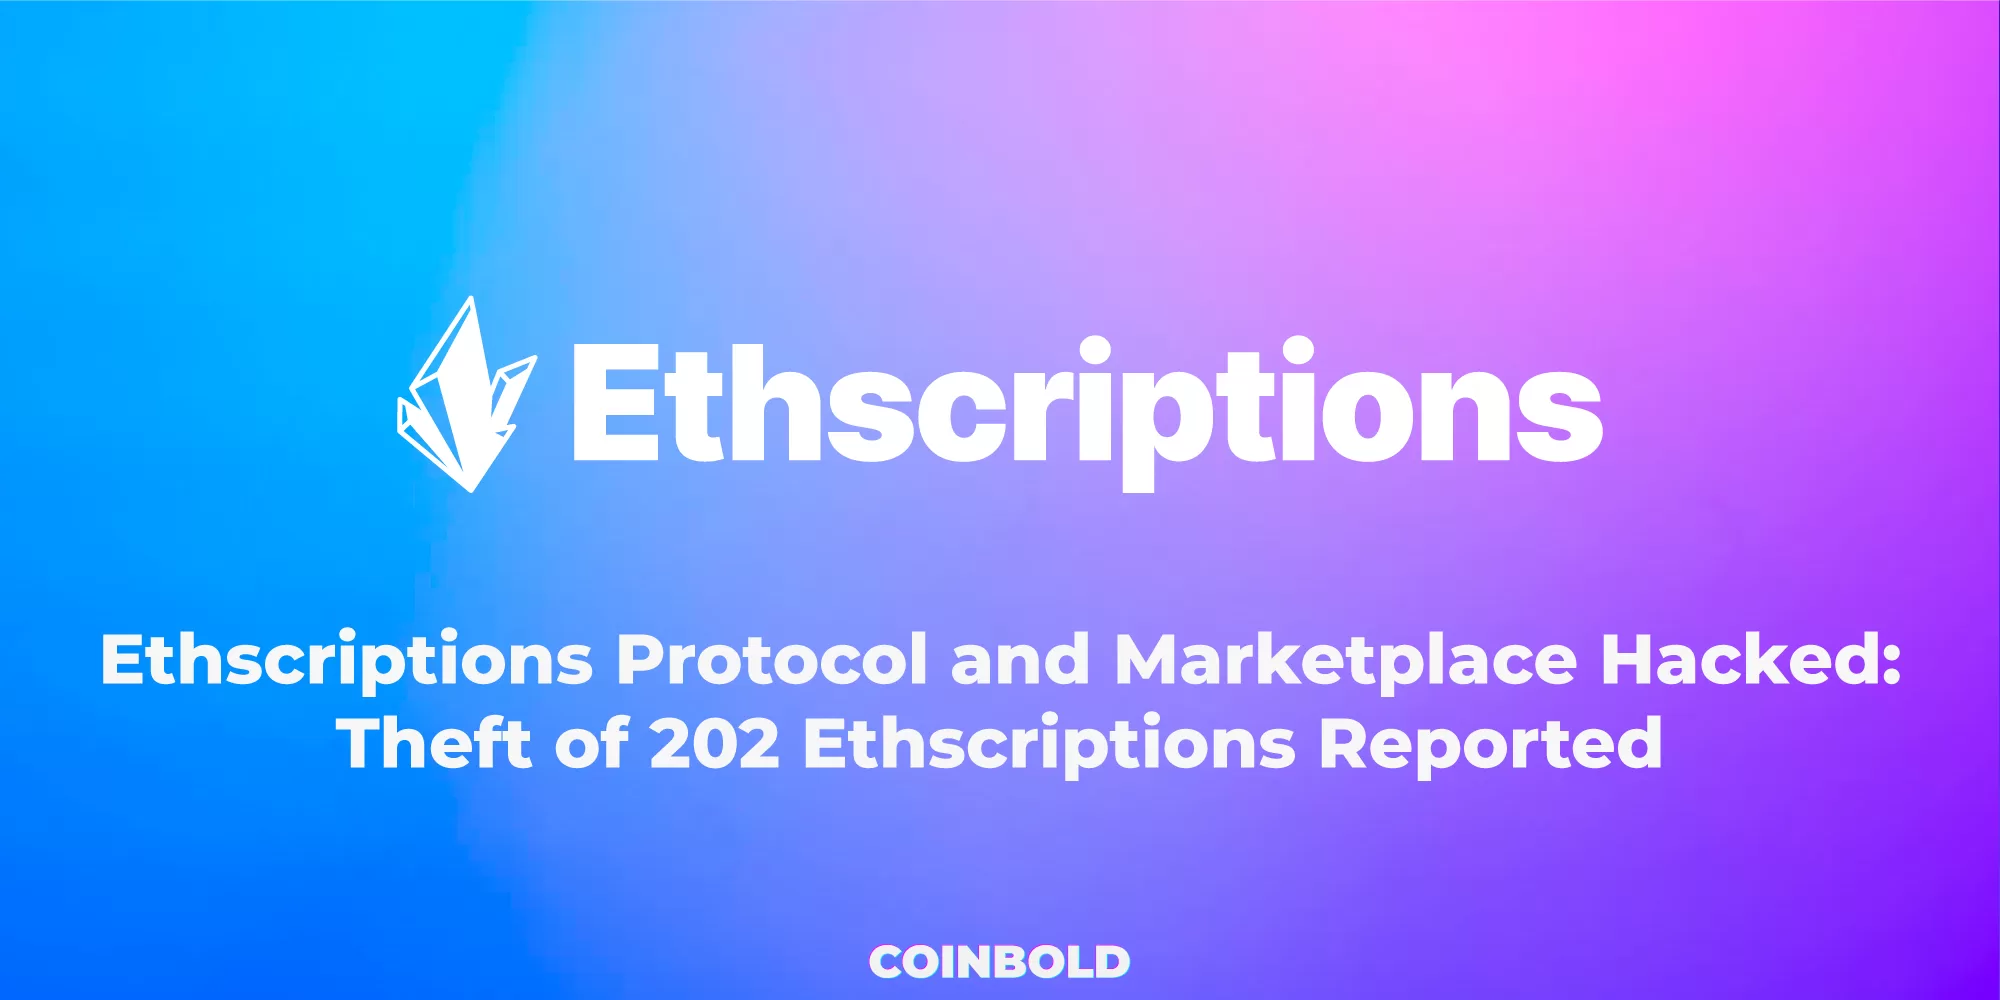 Ethscriptions Protocol and Marketplace Hacked: Theft of 202 Ethscriptions Reported